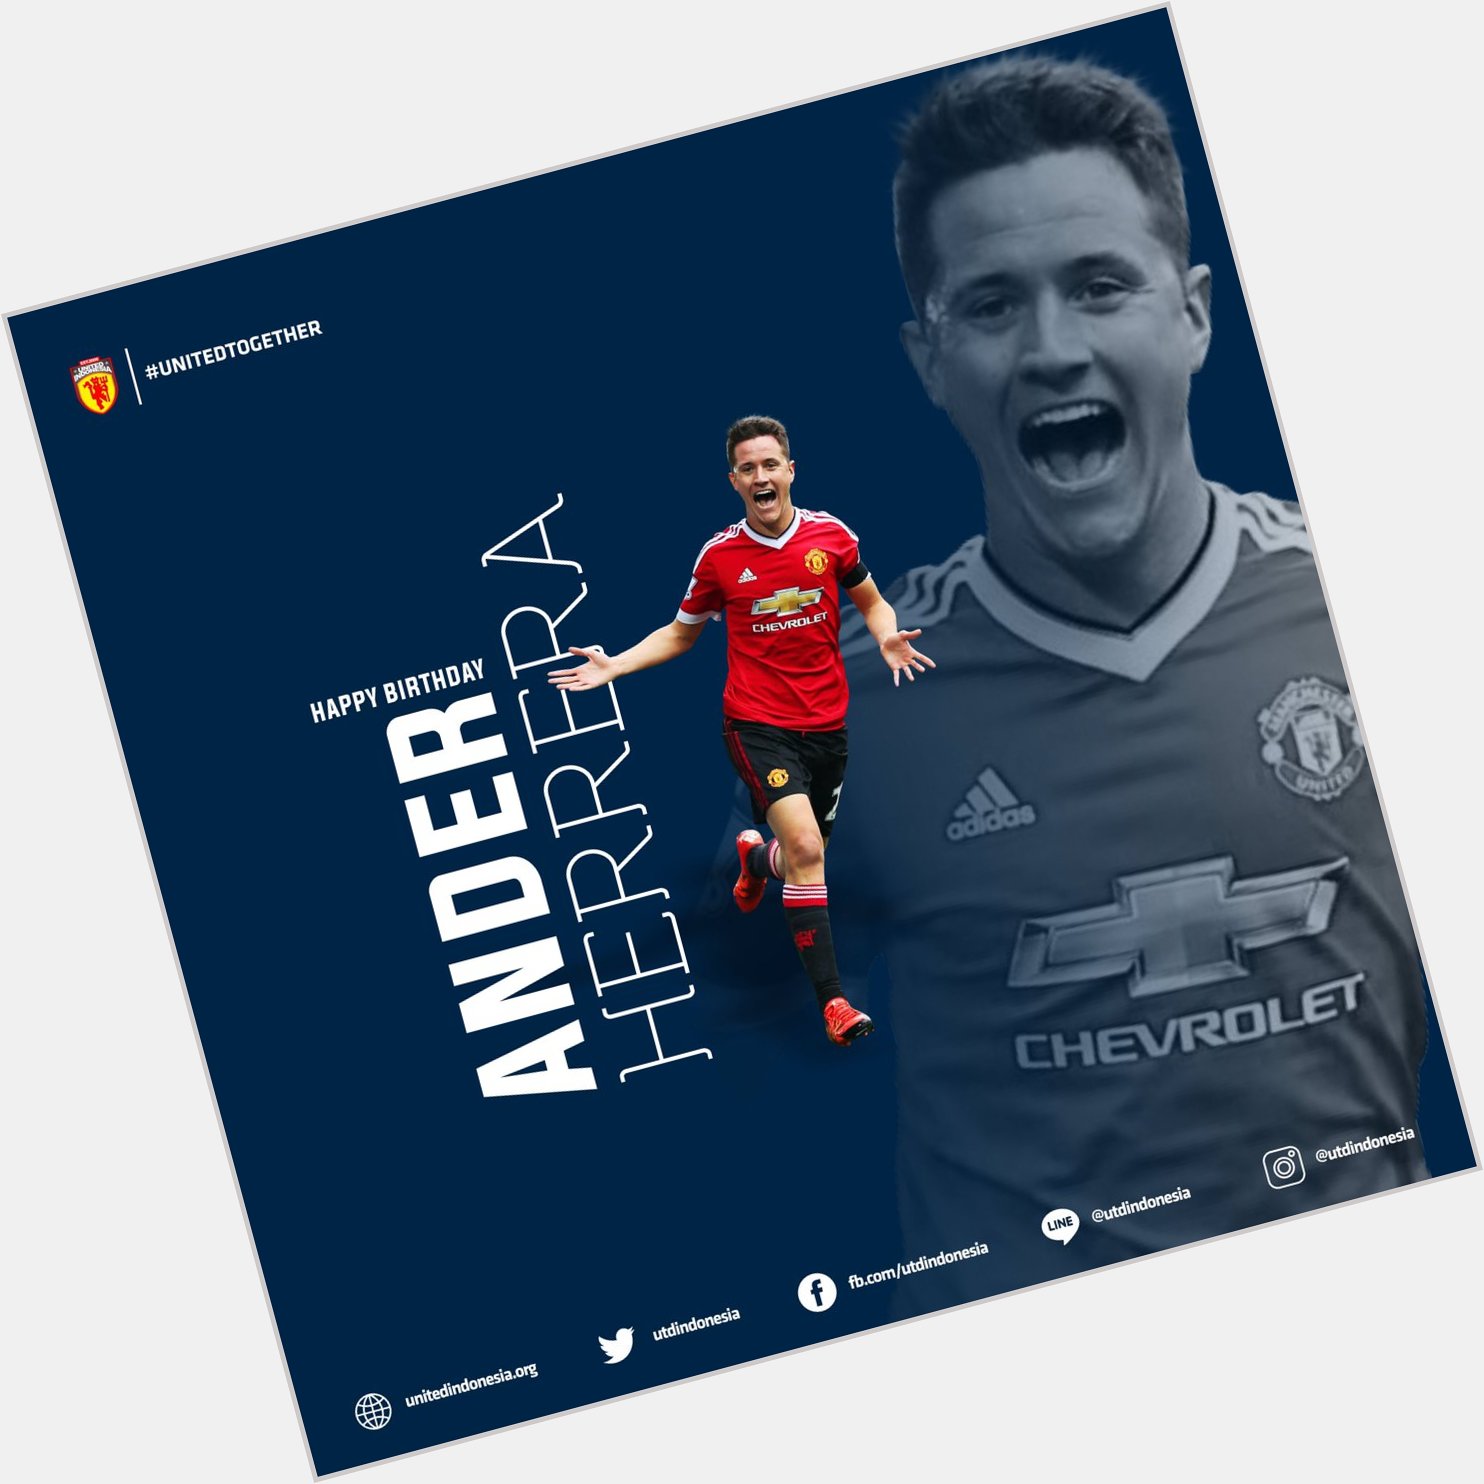 Happy birthday Ander Herrera. Wish you all the best from Indonesia
.  